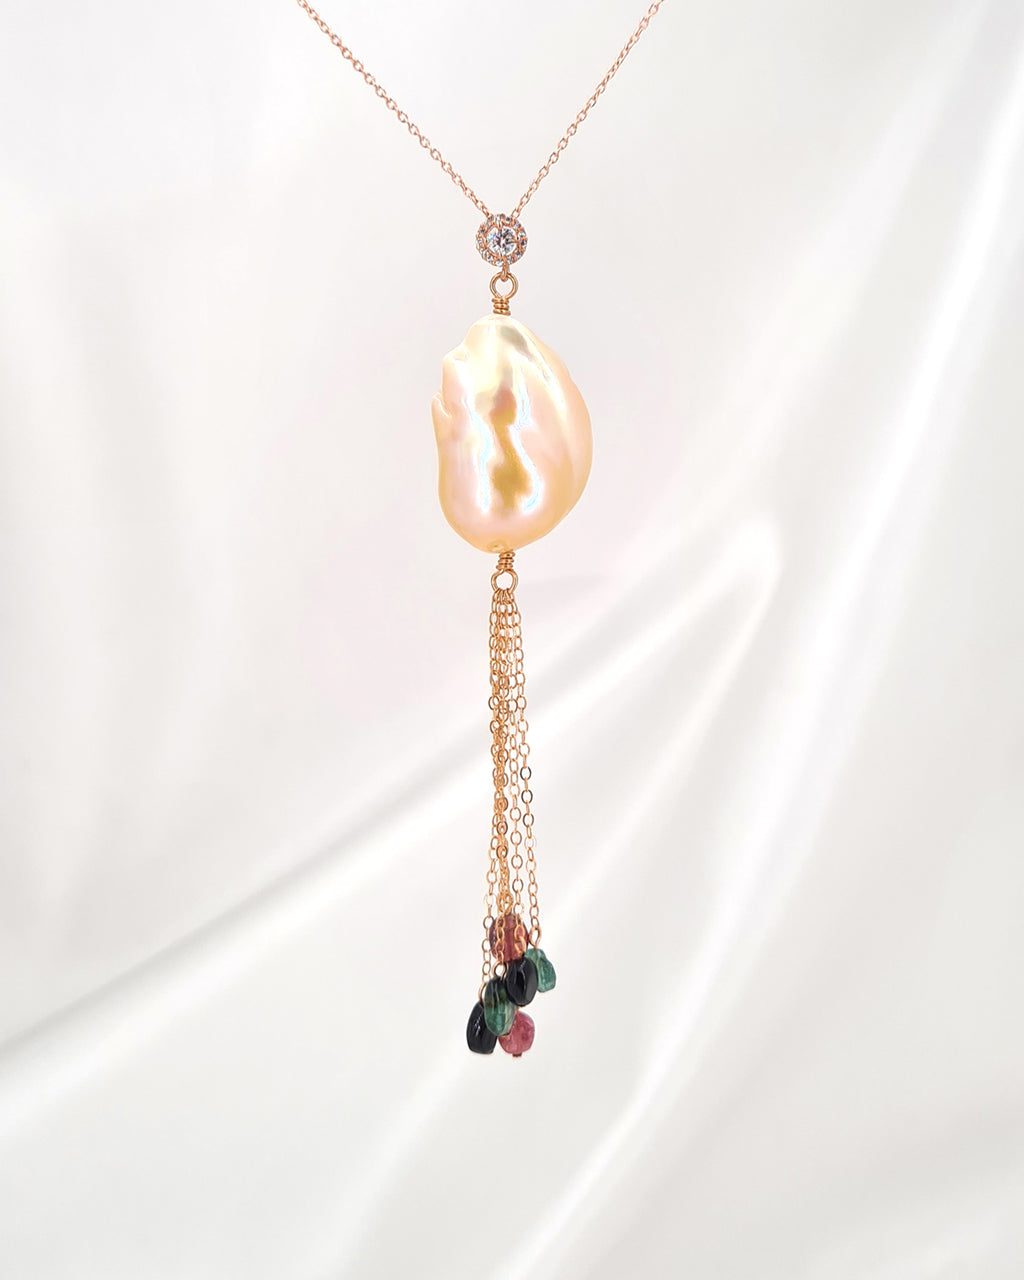 Baroque Pearl Tassel Necklace Rose Gold Filled Pearl and Gemstone Necklace